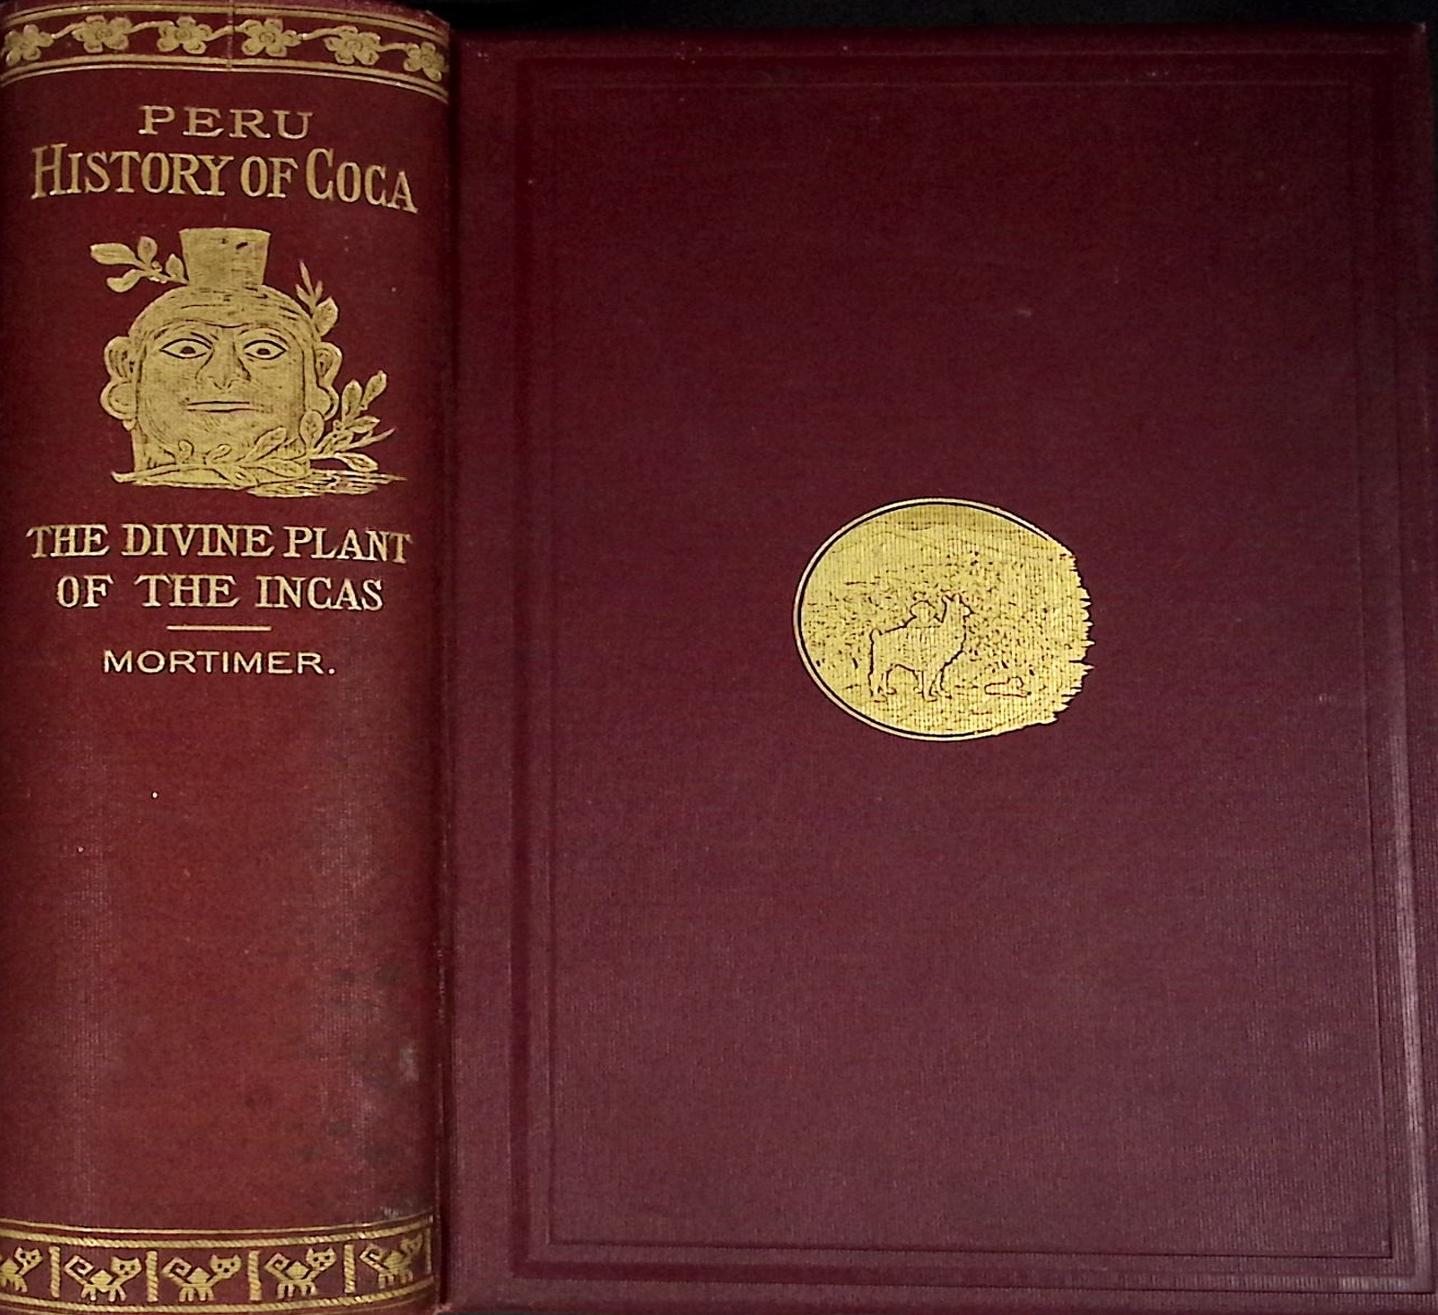 Peru. History of Coca. "The Divine Plant" of the Incas. With an Introductory Account of the Incas, and of the Andean Indians of To-day.